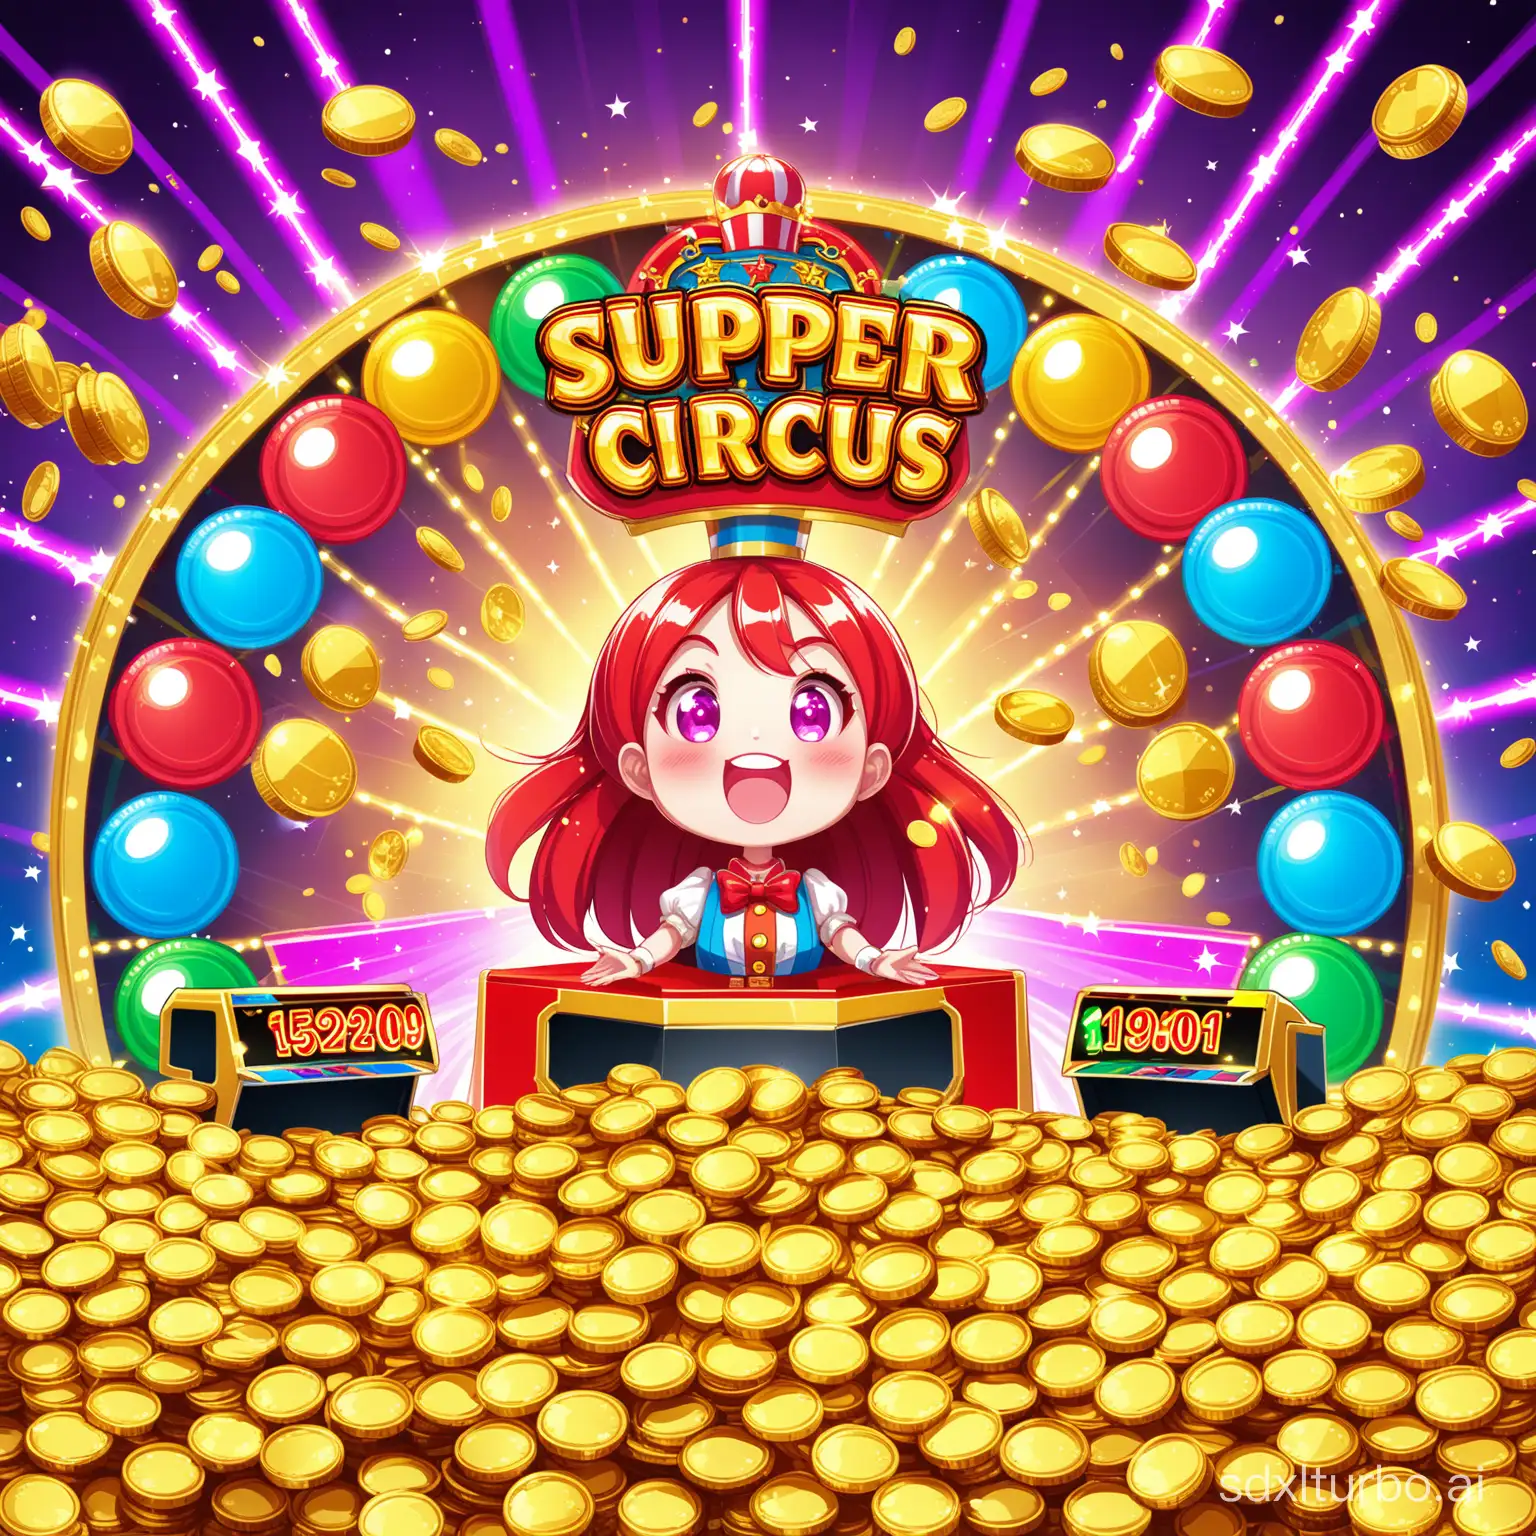 Arcade game Super Circus, coin pusher jackpot, BIGWIN, gold coins explosion